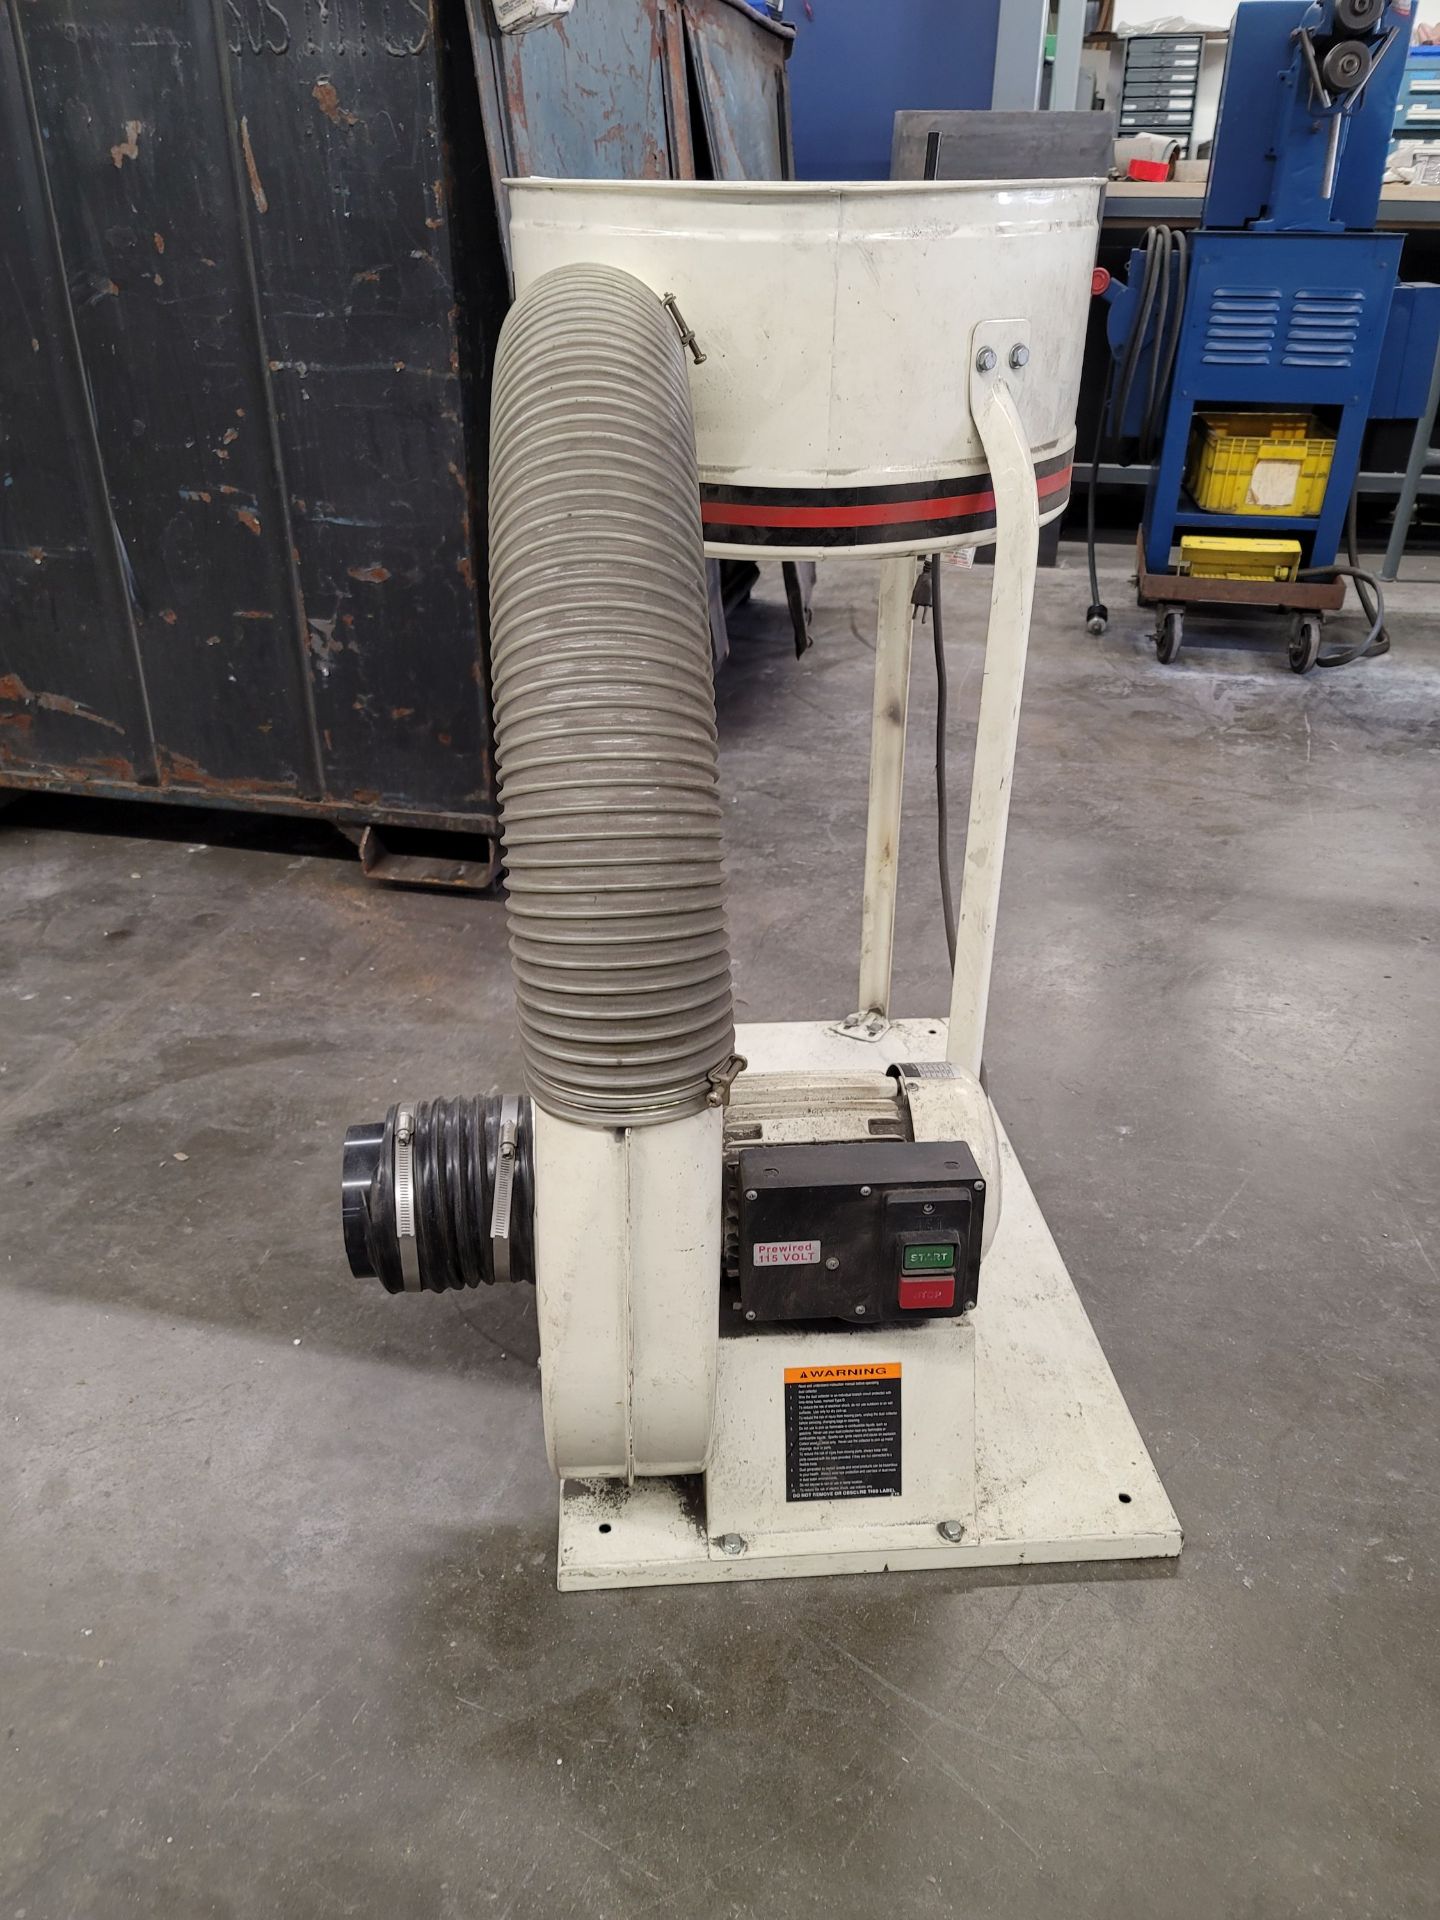 JET 1100 CFM DUST COLLECTOR, MODEL DC-1100A, 1-1/2 HP, SINGLE PHASE, S/N 40713873, MISSING THE - Image 4 of 4